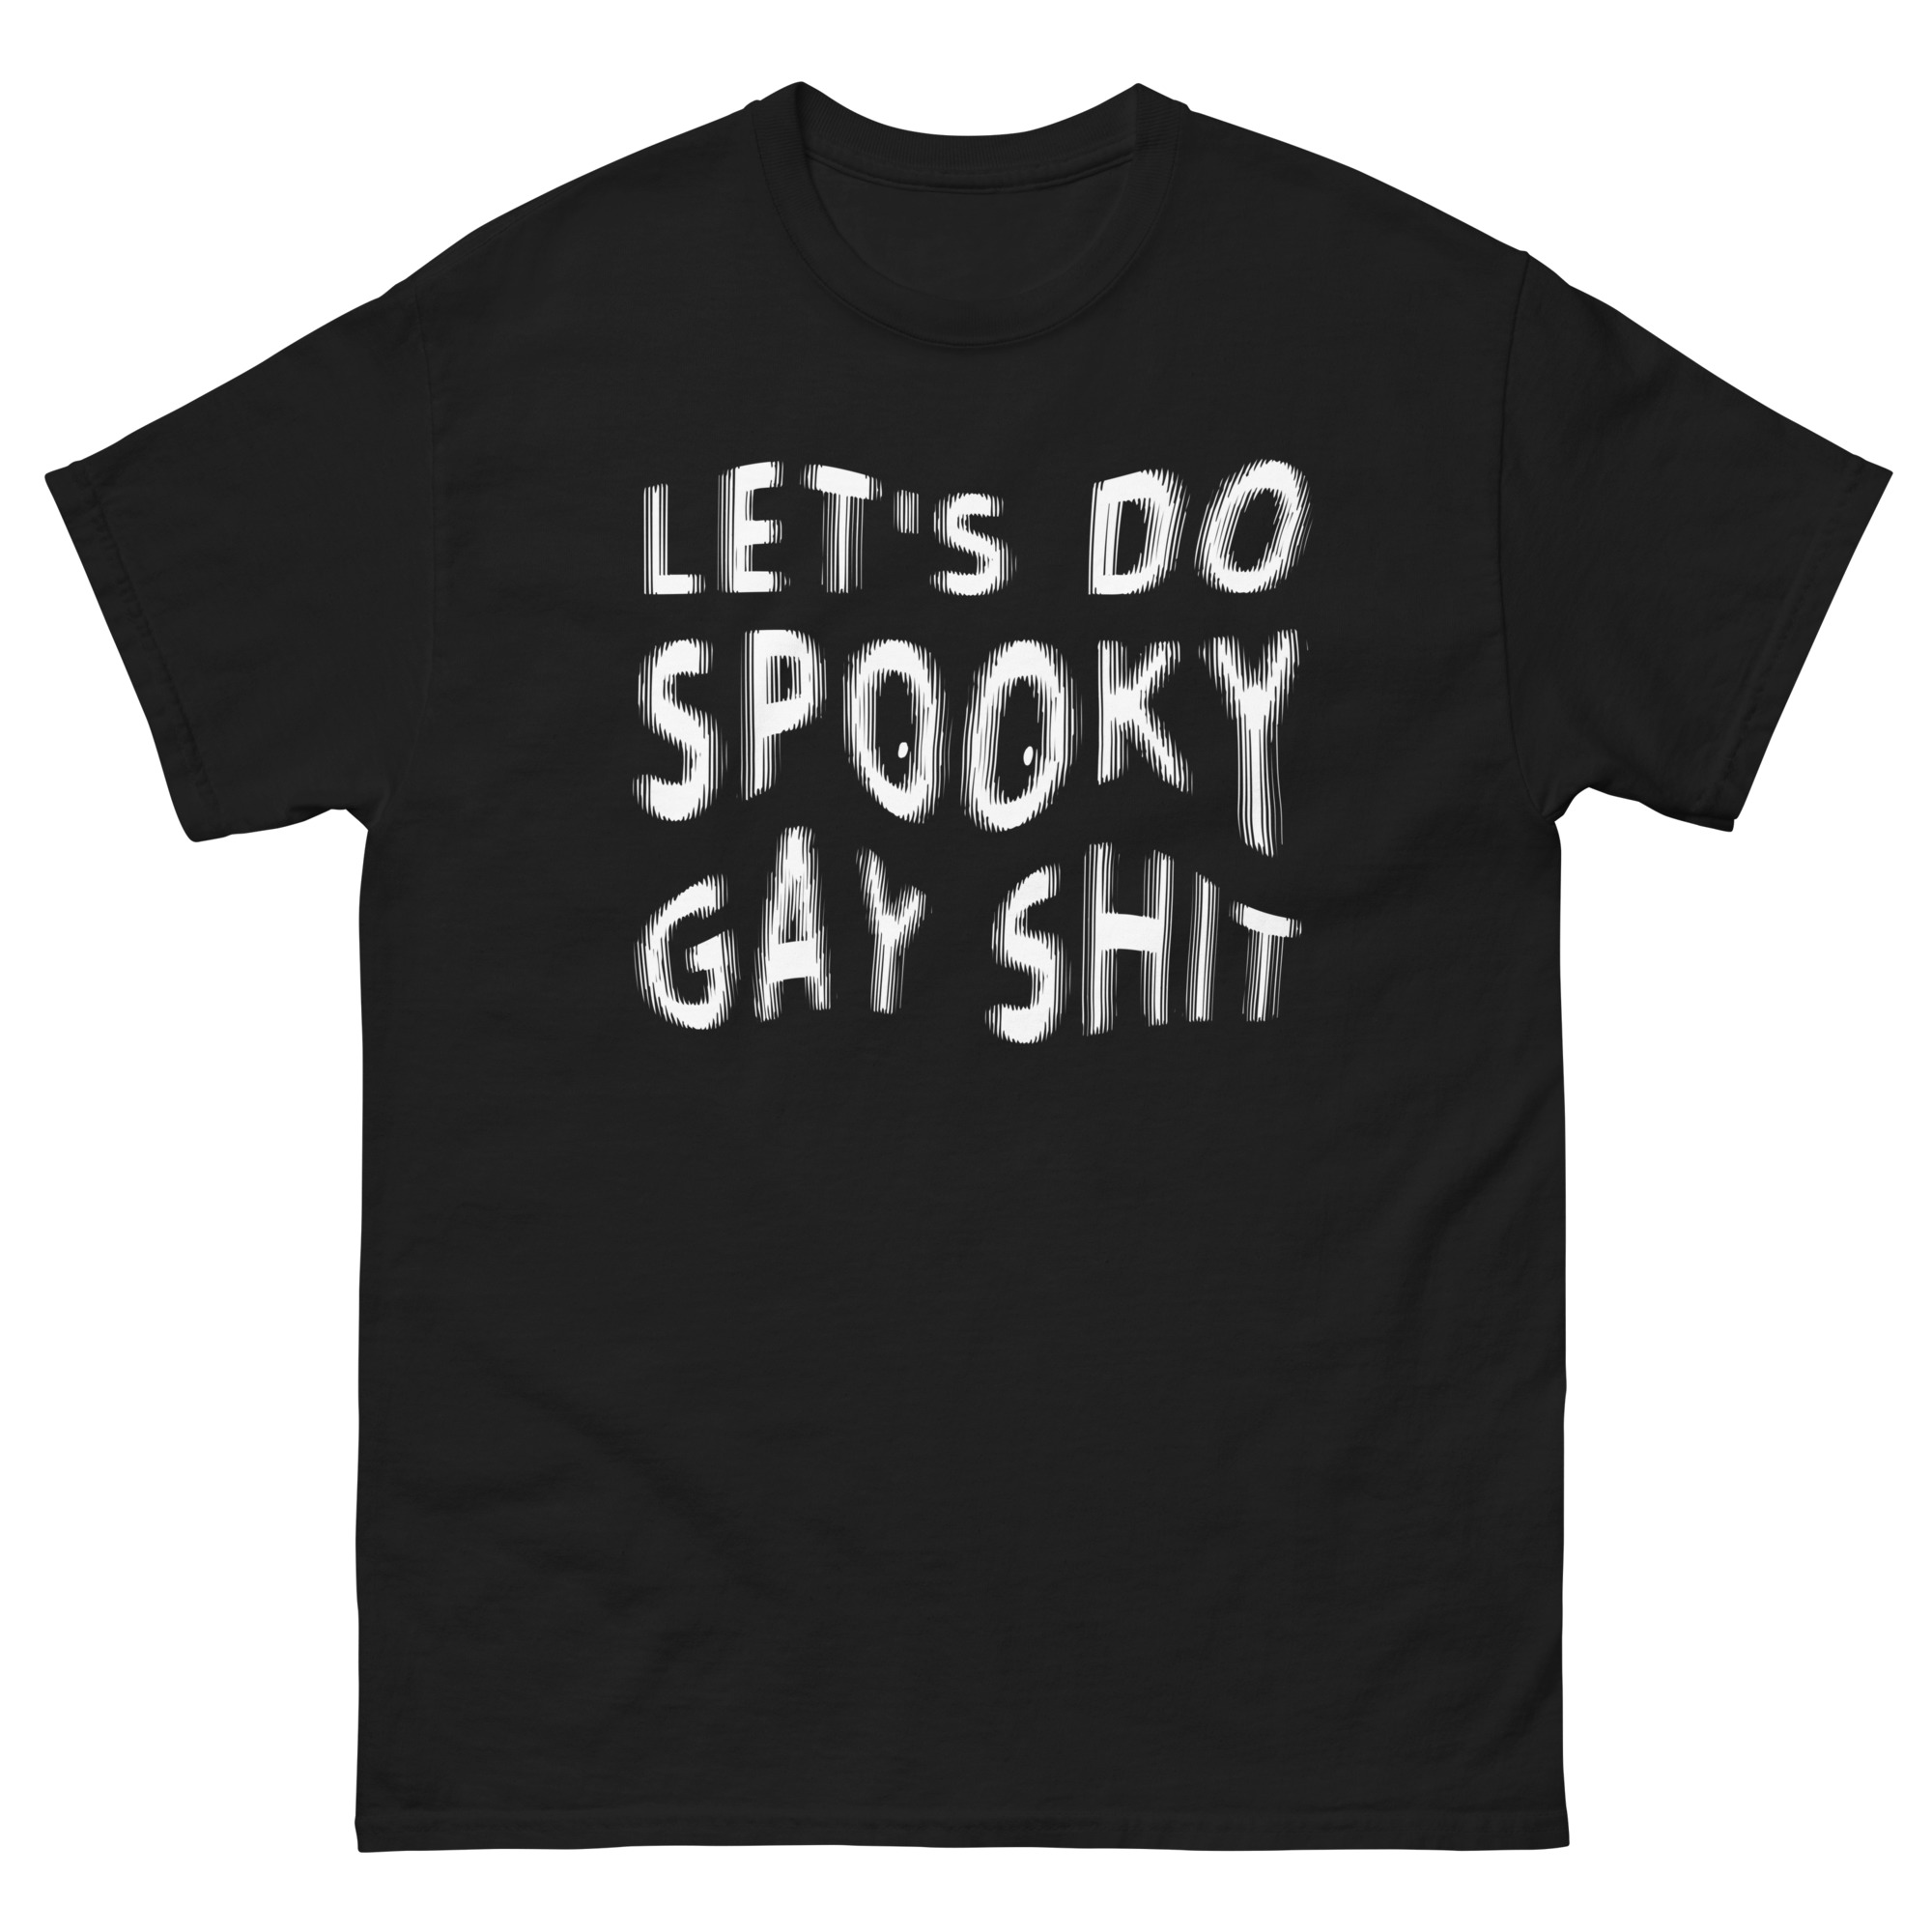 Featured image for “Let’s do Spooky Gay Shit - Men's classic tee”